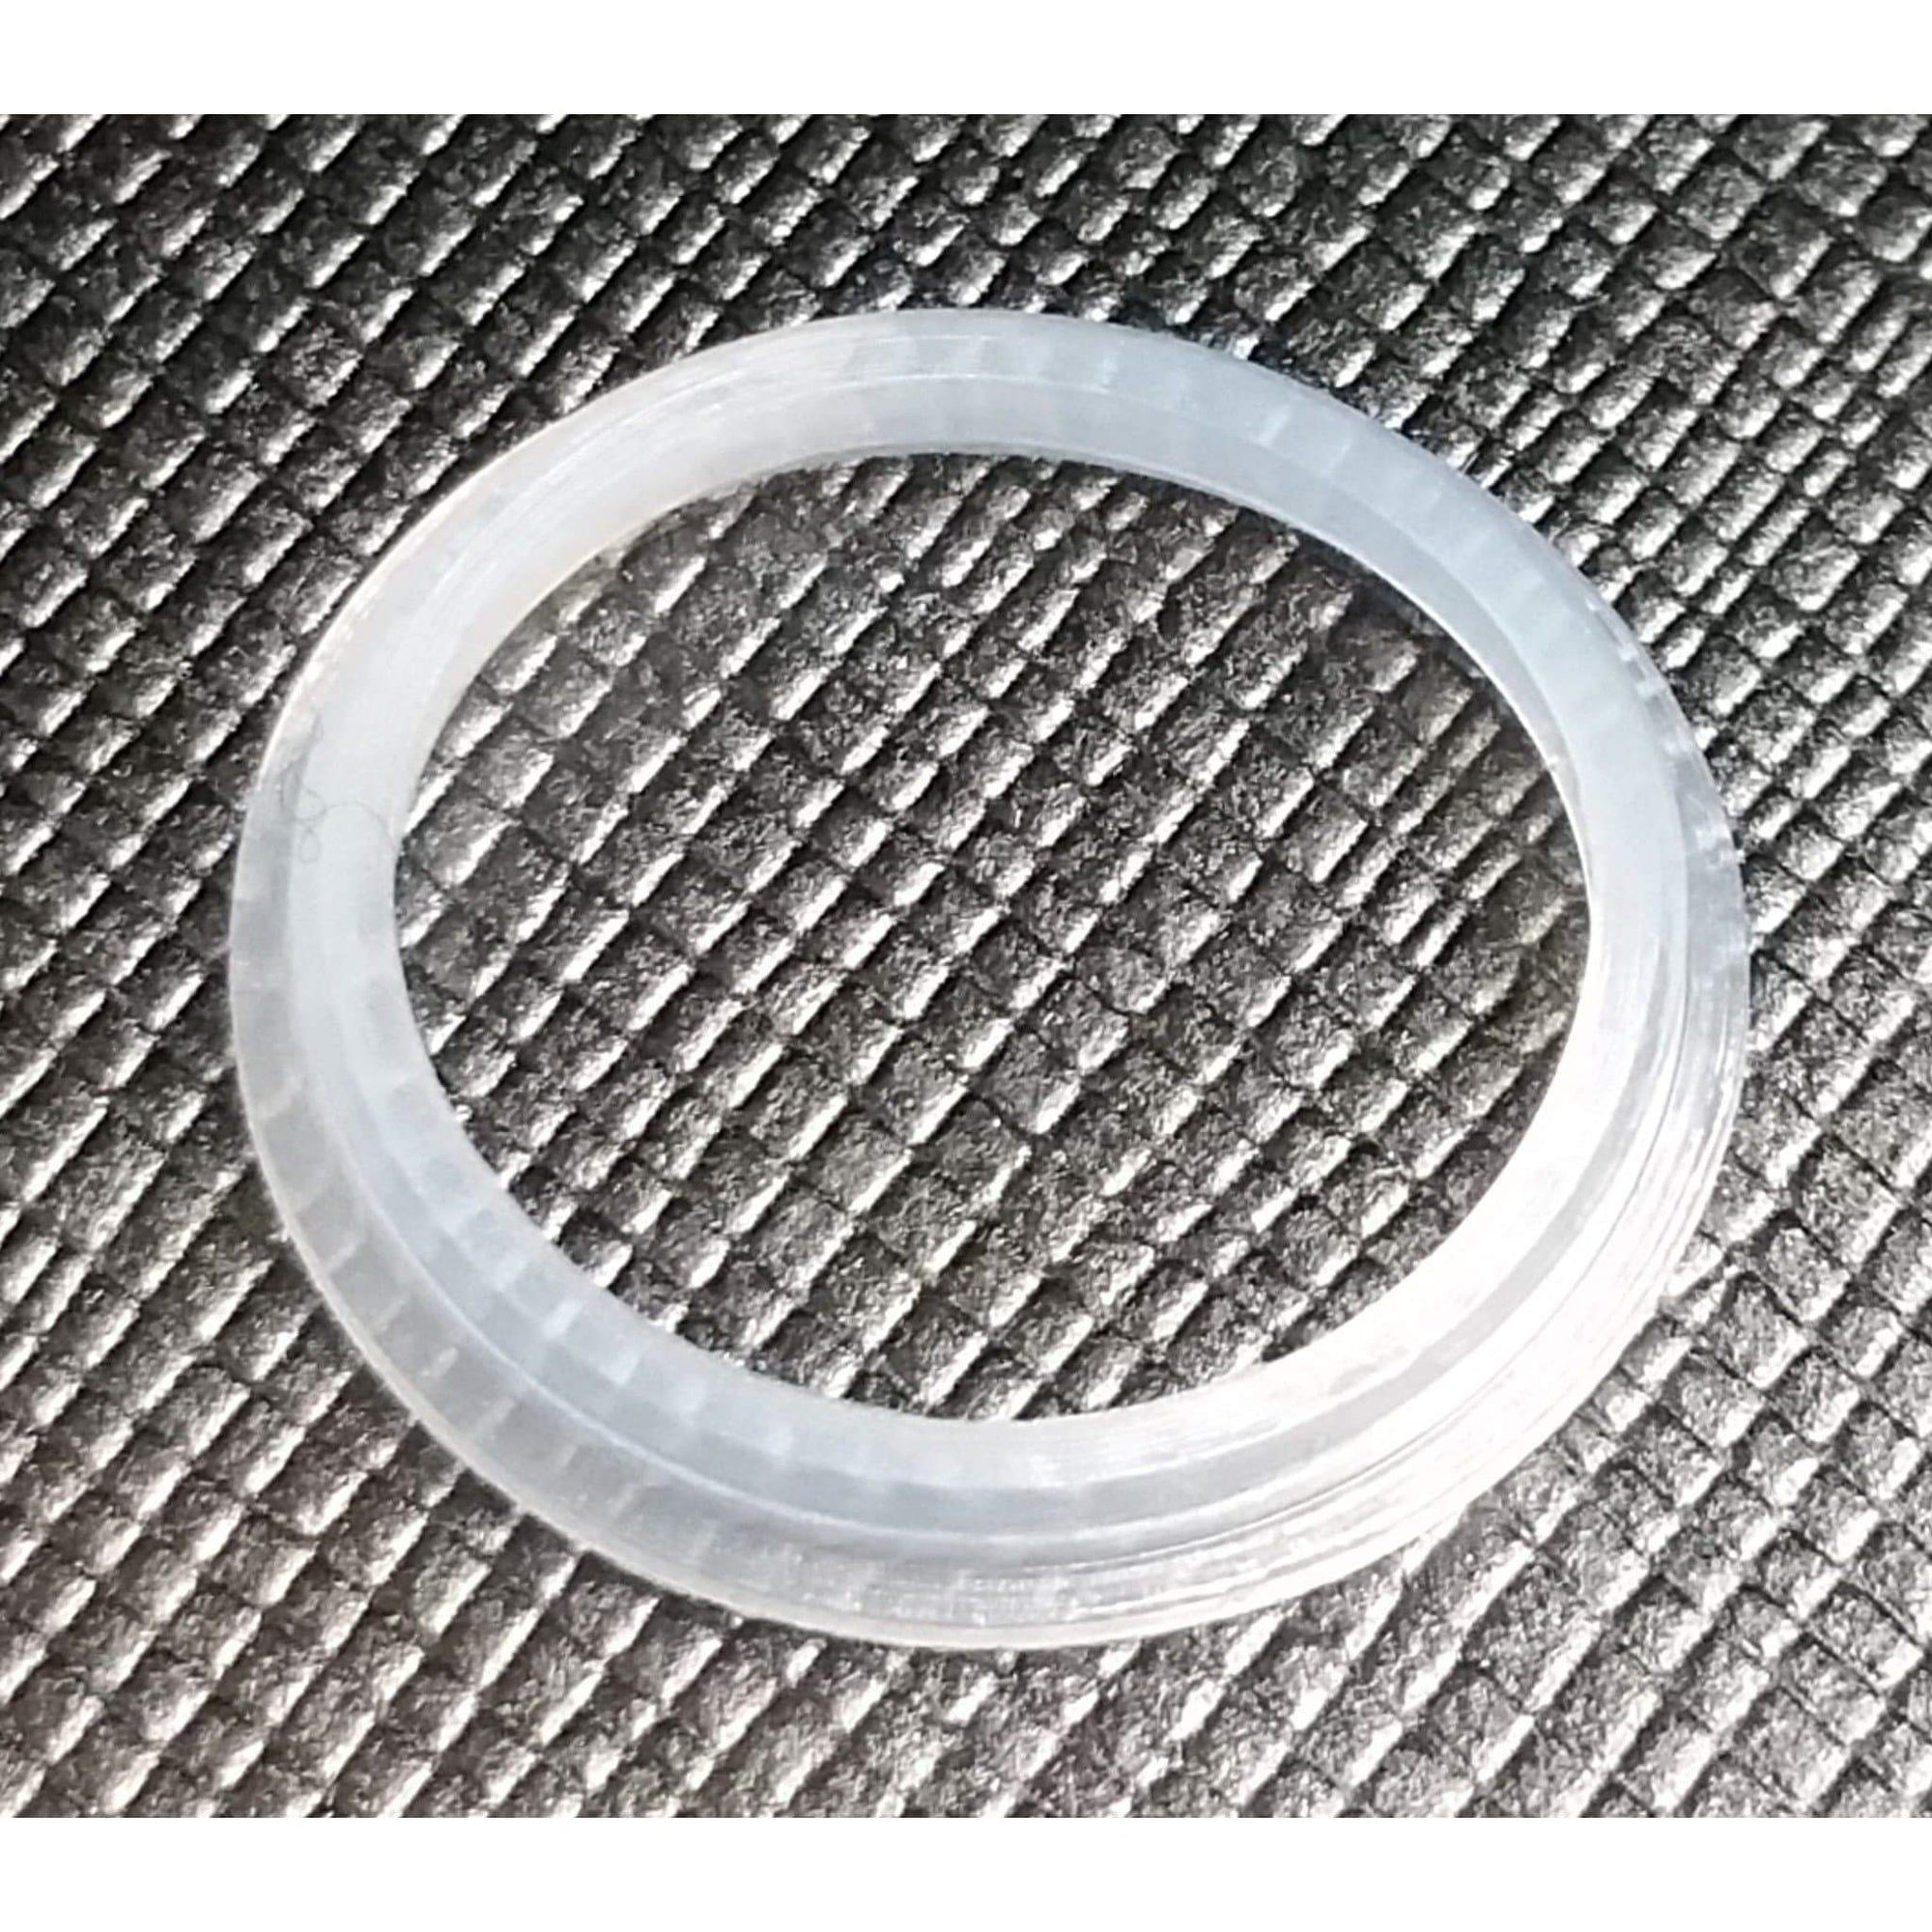 TFV4 Nano Replacement Seals BOTTOM Clear Seal Seals/Oring's